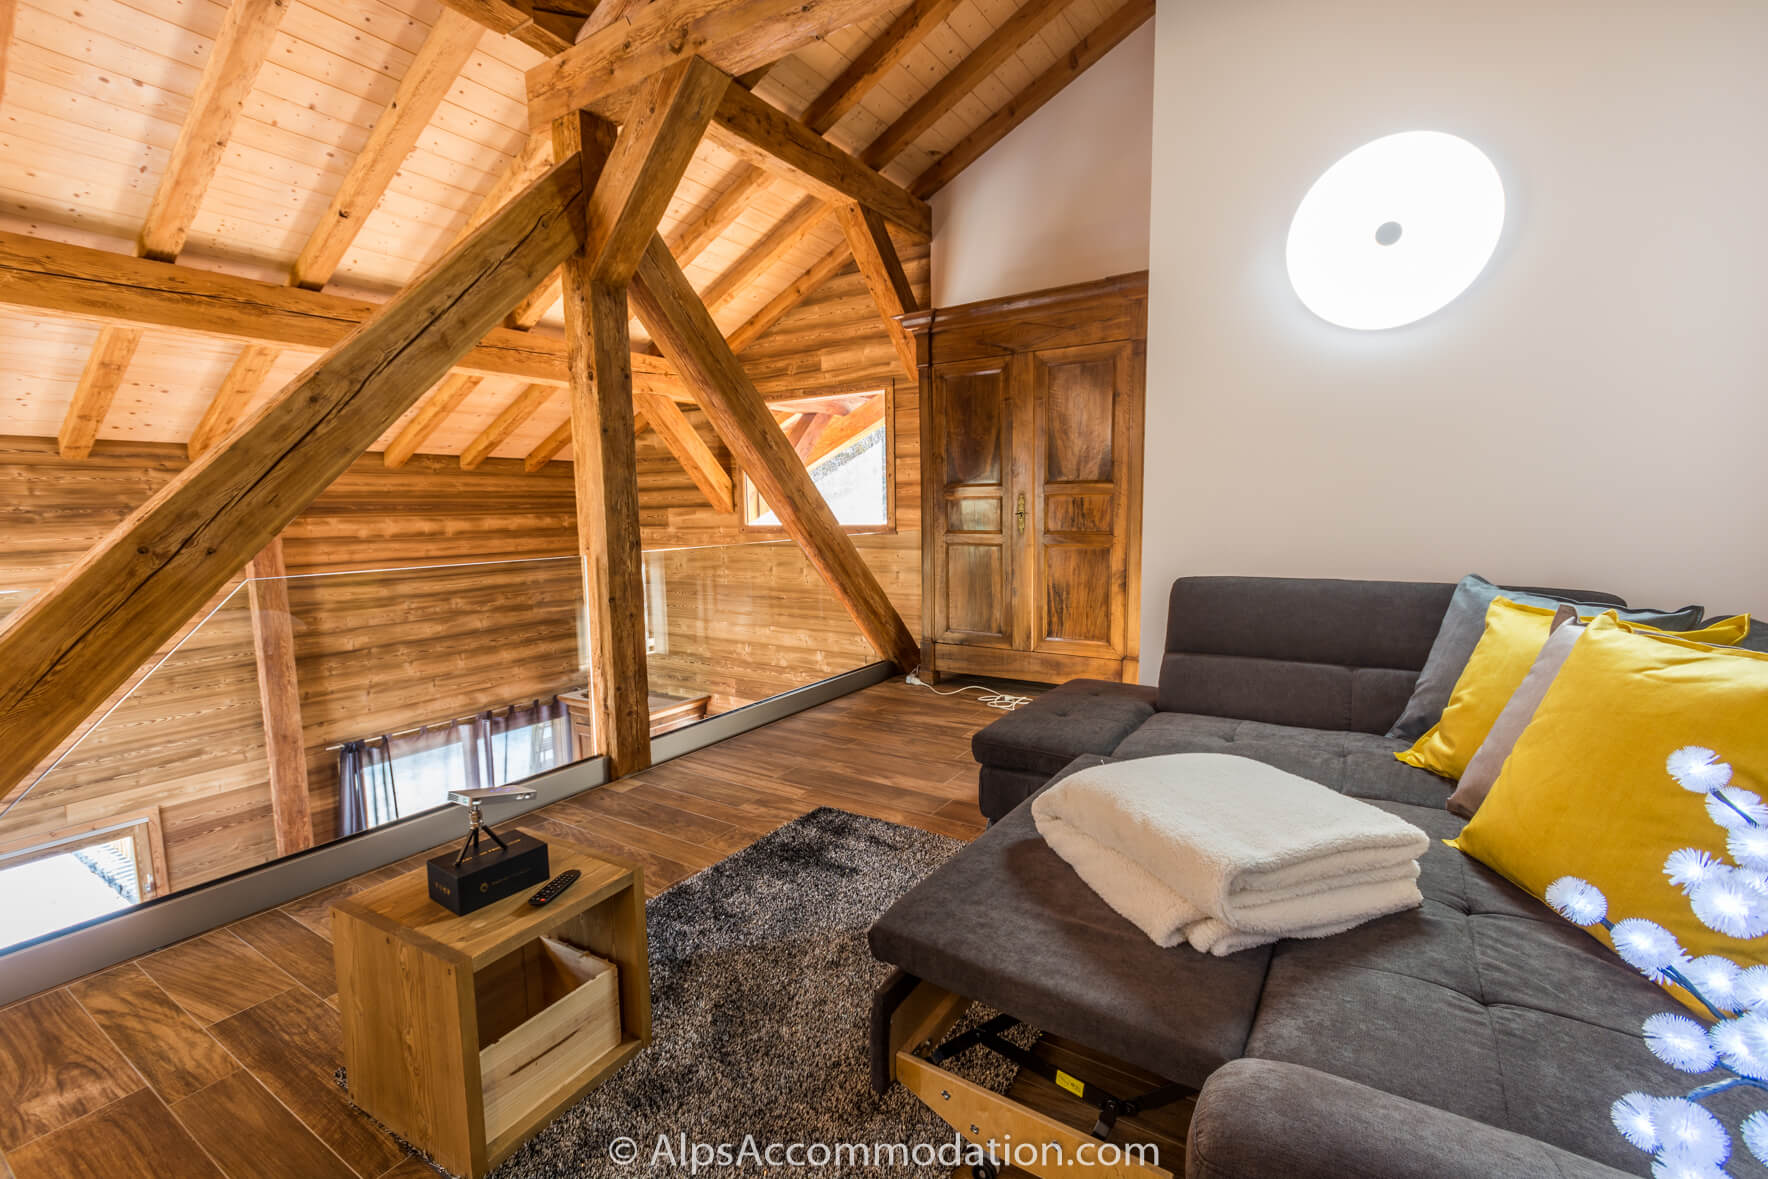 Chalet Sole Mio Morillon - Mezzanine area surrounded by rustic wooden beams